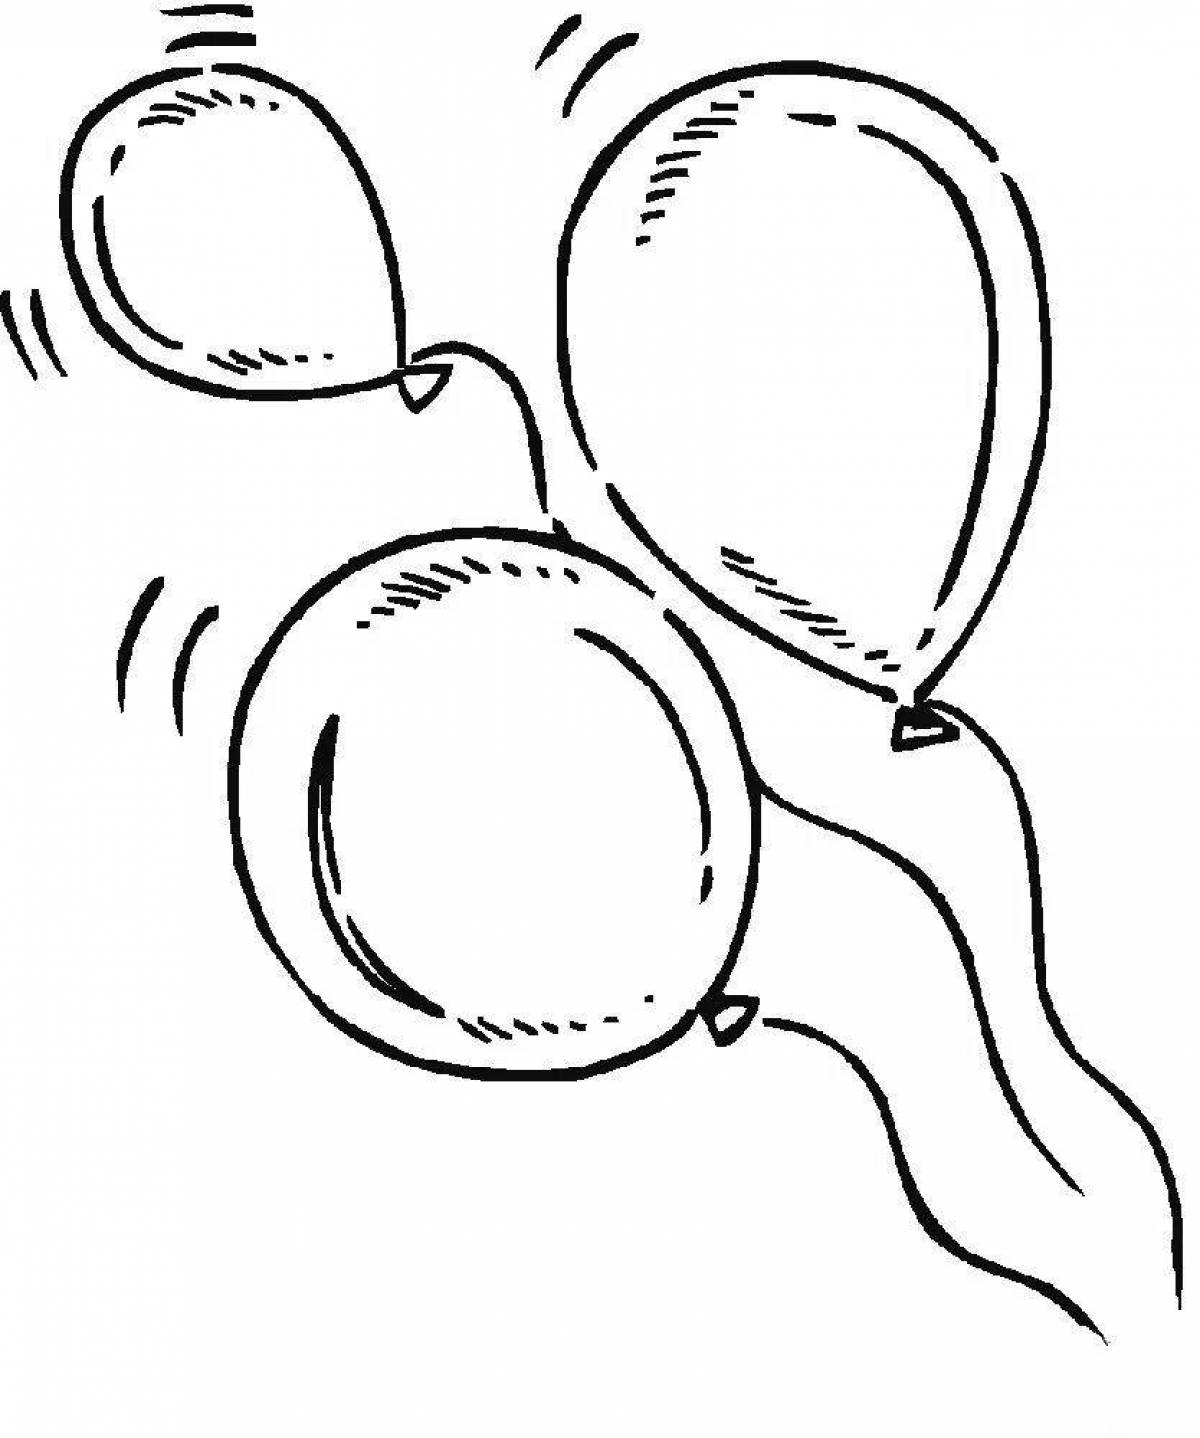 Coloring pages with balloons for kids